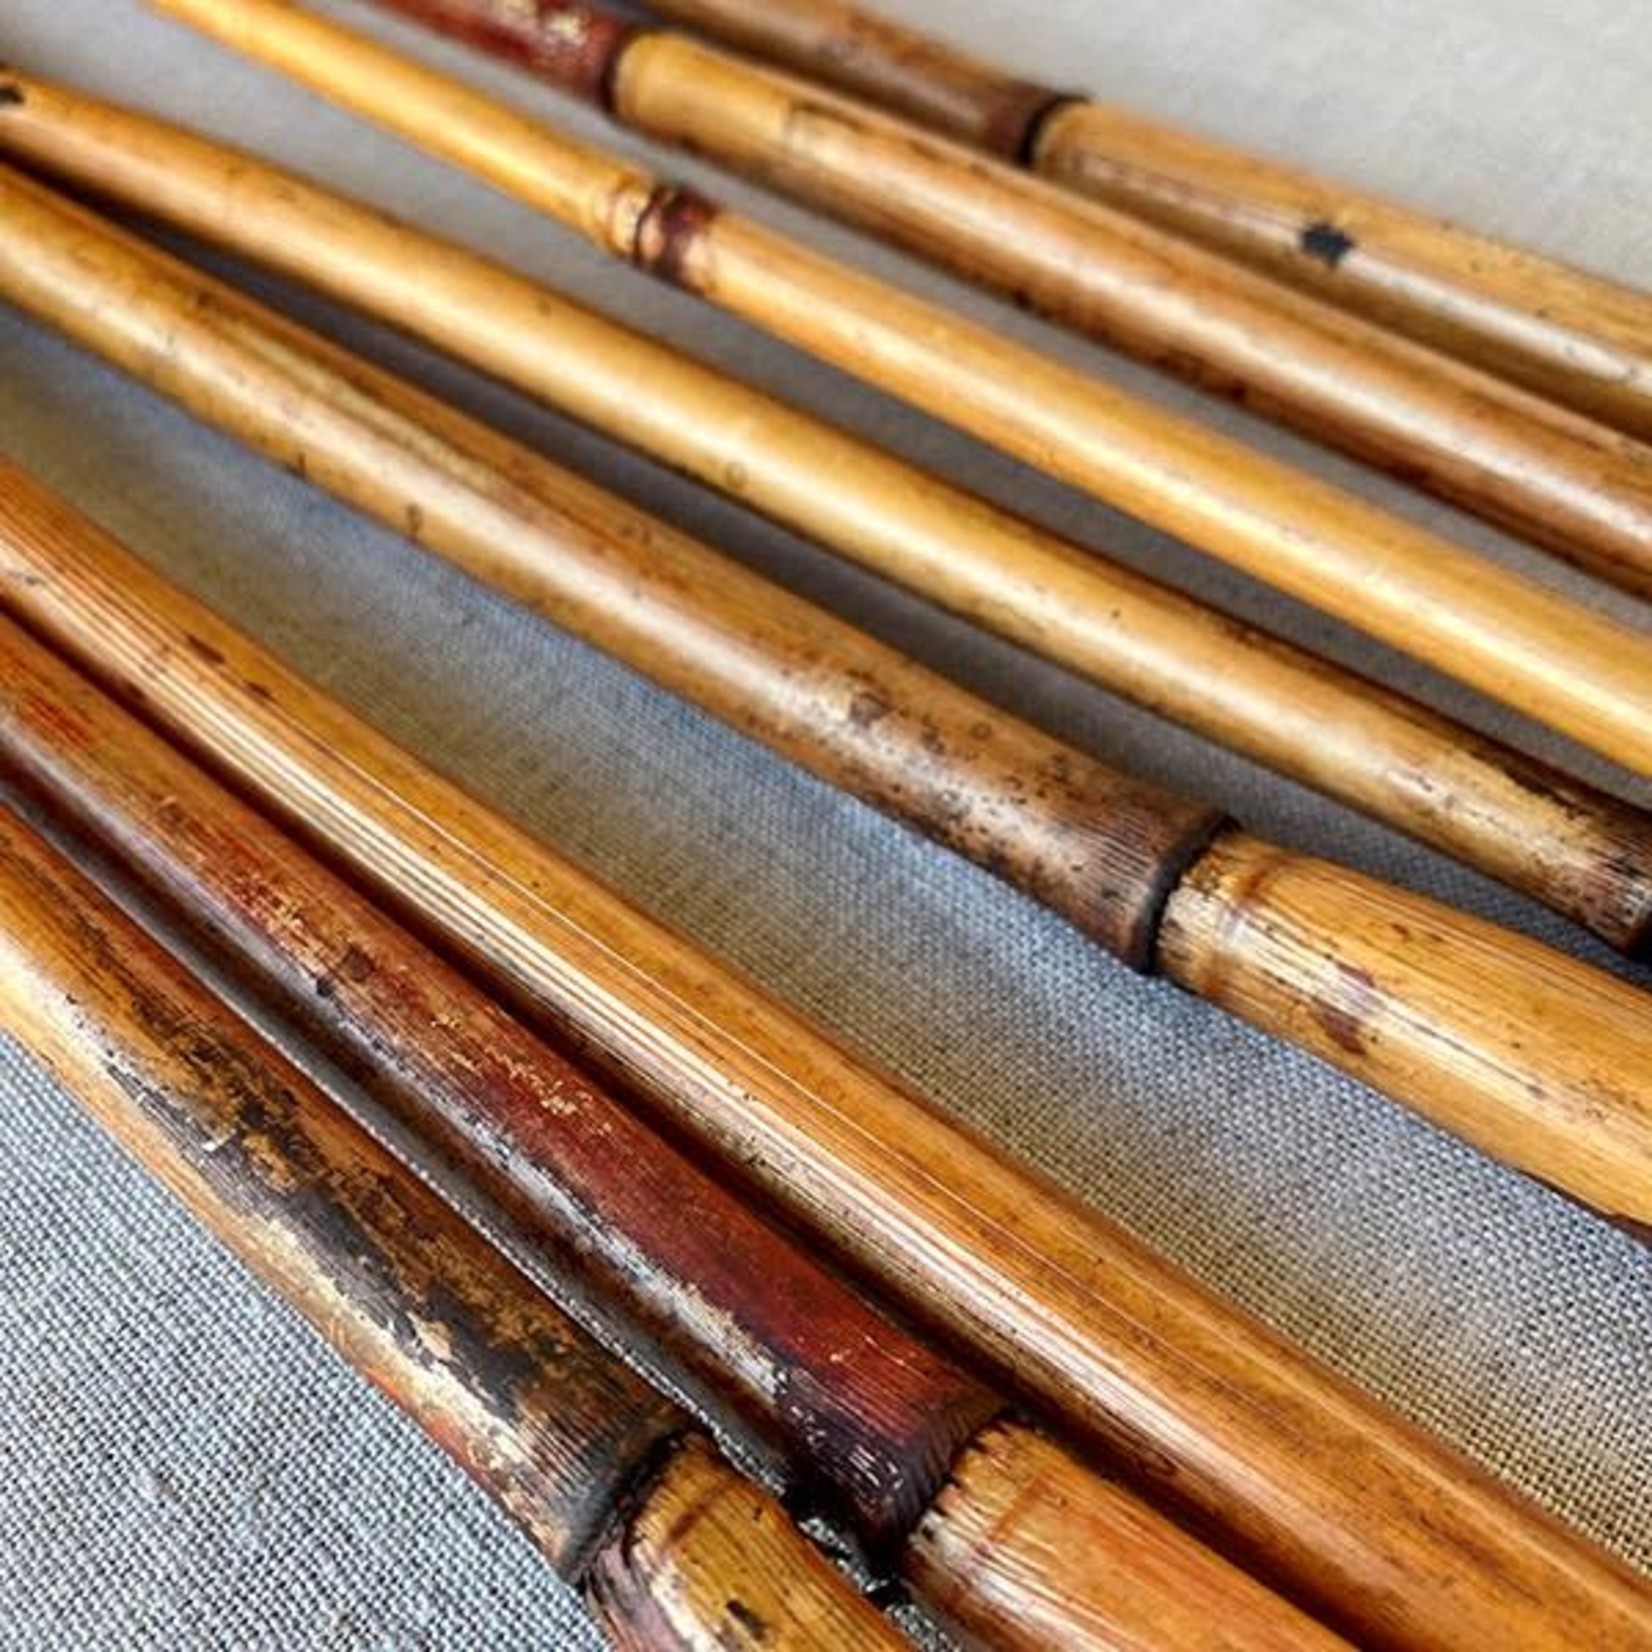 WALNUT RIVER CANE 3.5 FT 25 PCS IN BUNCH